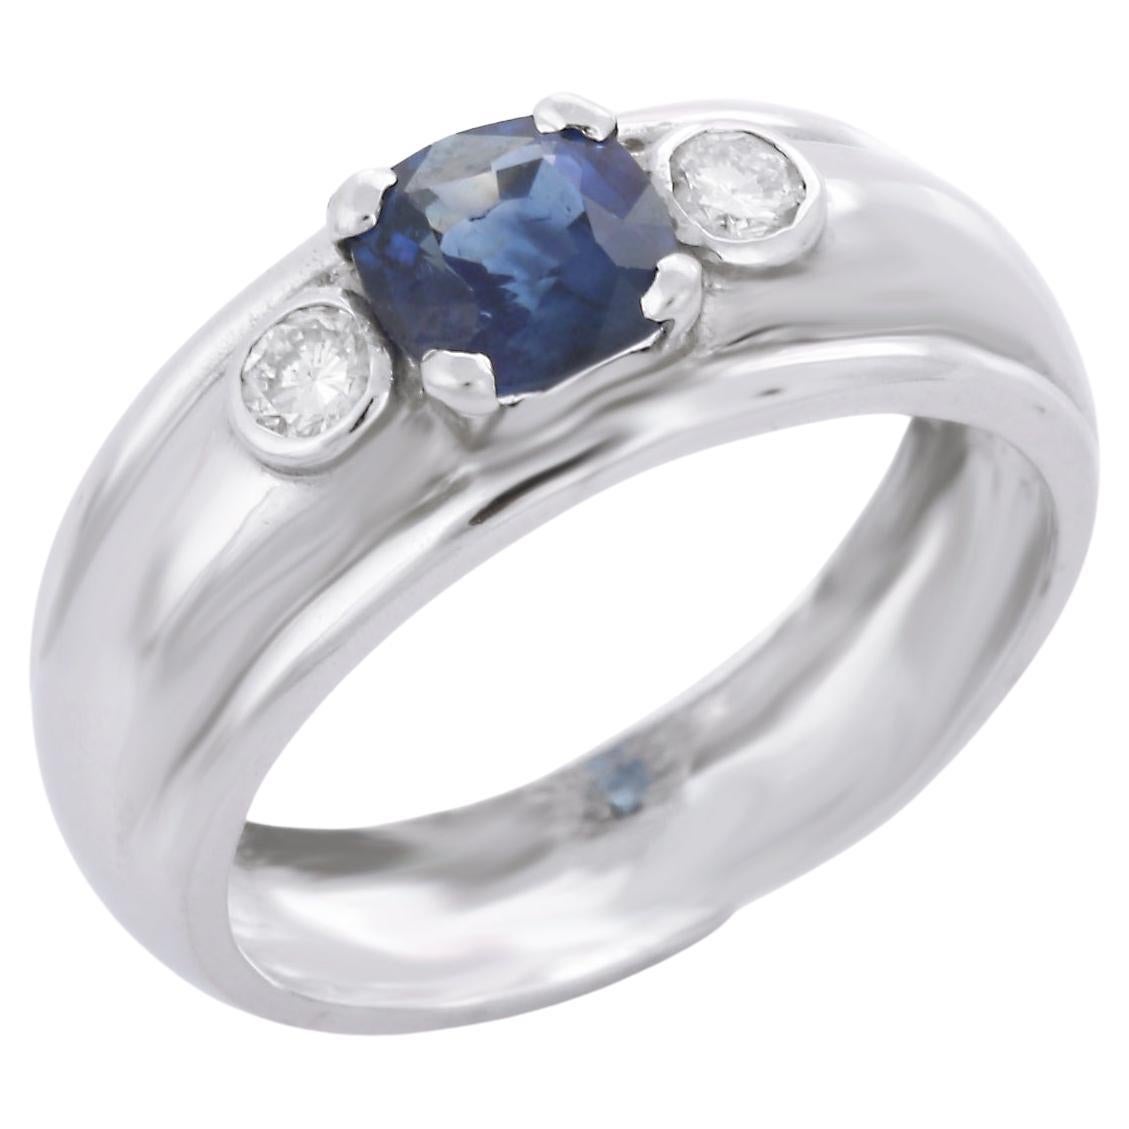 1.5 Ct Blue Sapphire Band Style Wedding Ring 18K Solid White Gold with Diamonds